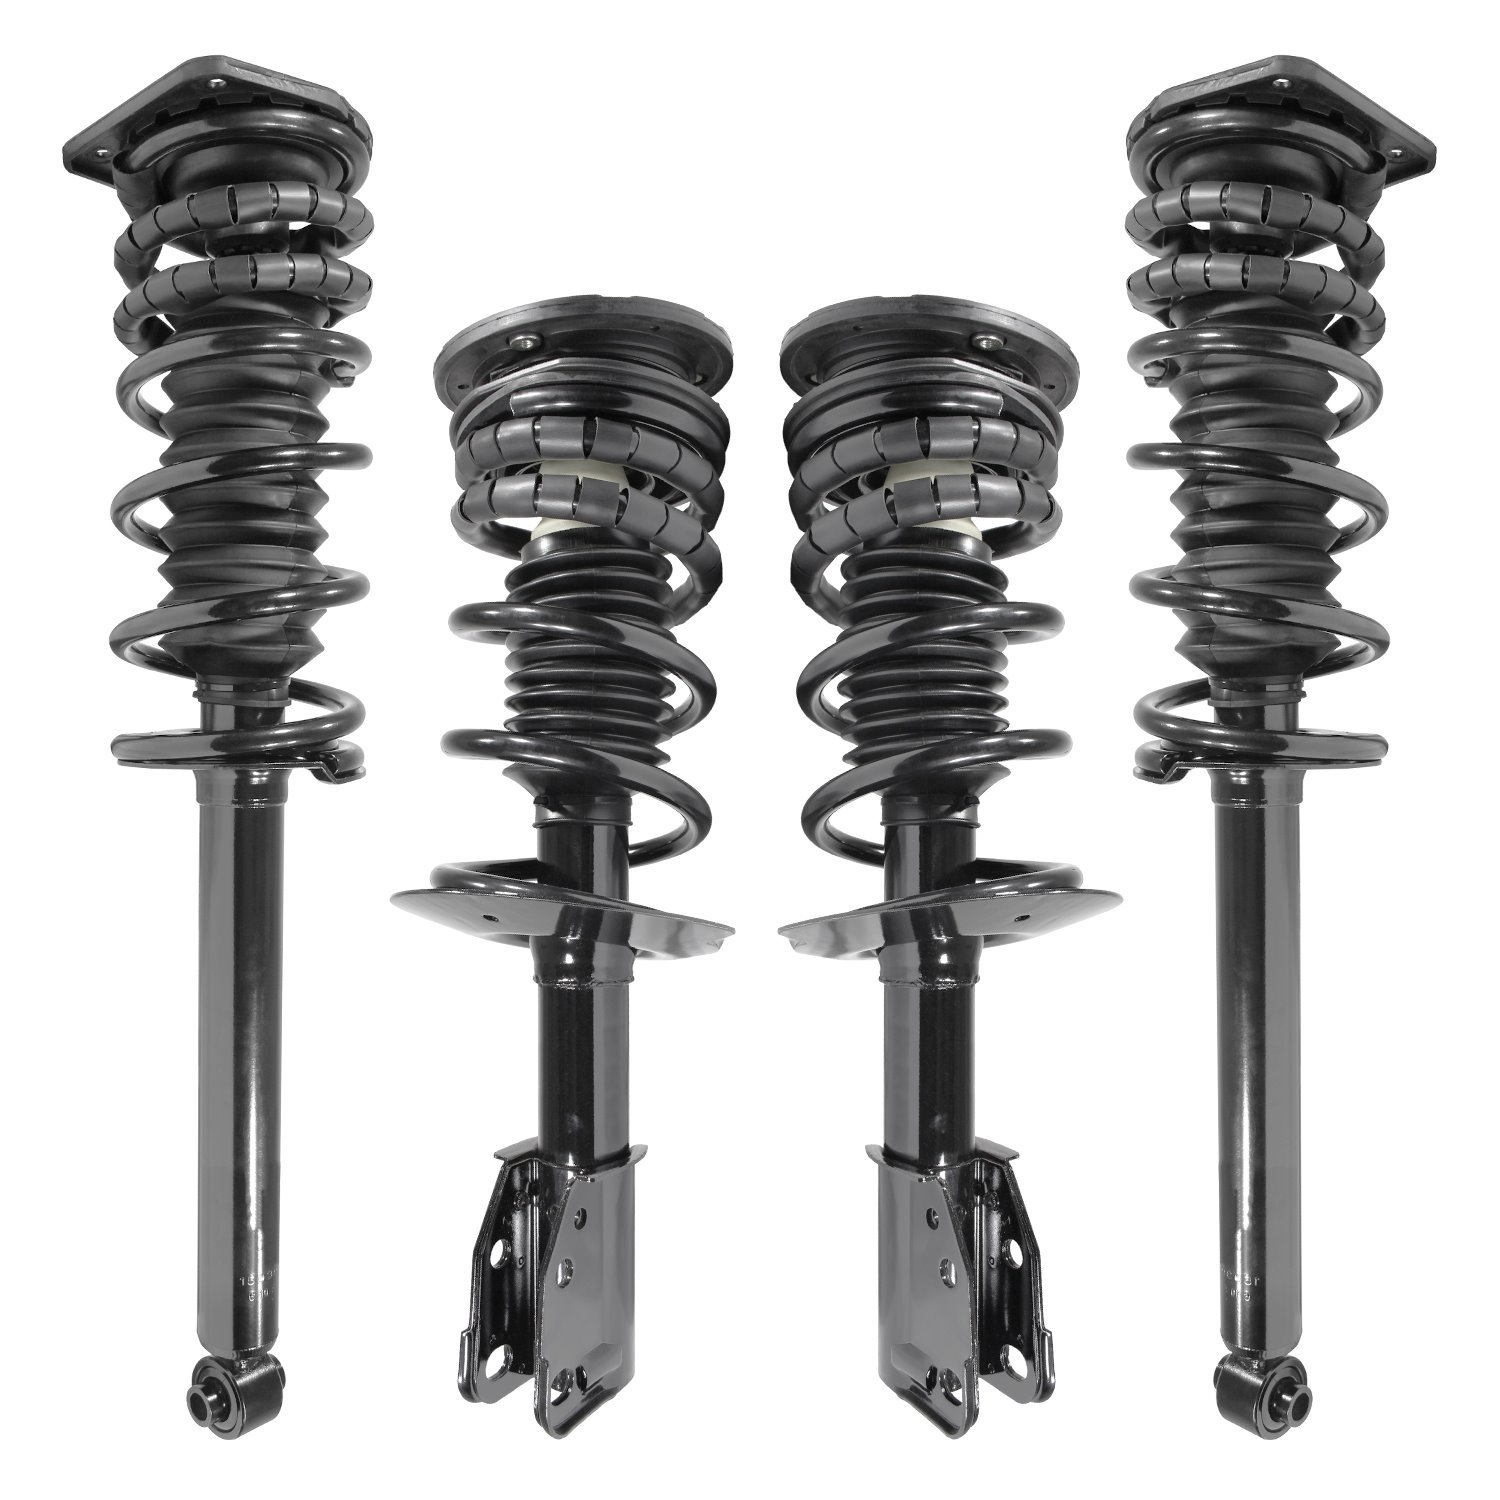 4-11050-15030-001 Front & Rear Suspension Strut & Coil Spring Assembly Kit Fits Select Chevy Cavalier, Pontiac Sunfire